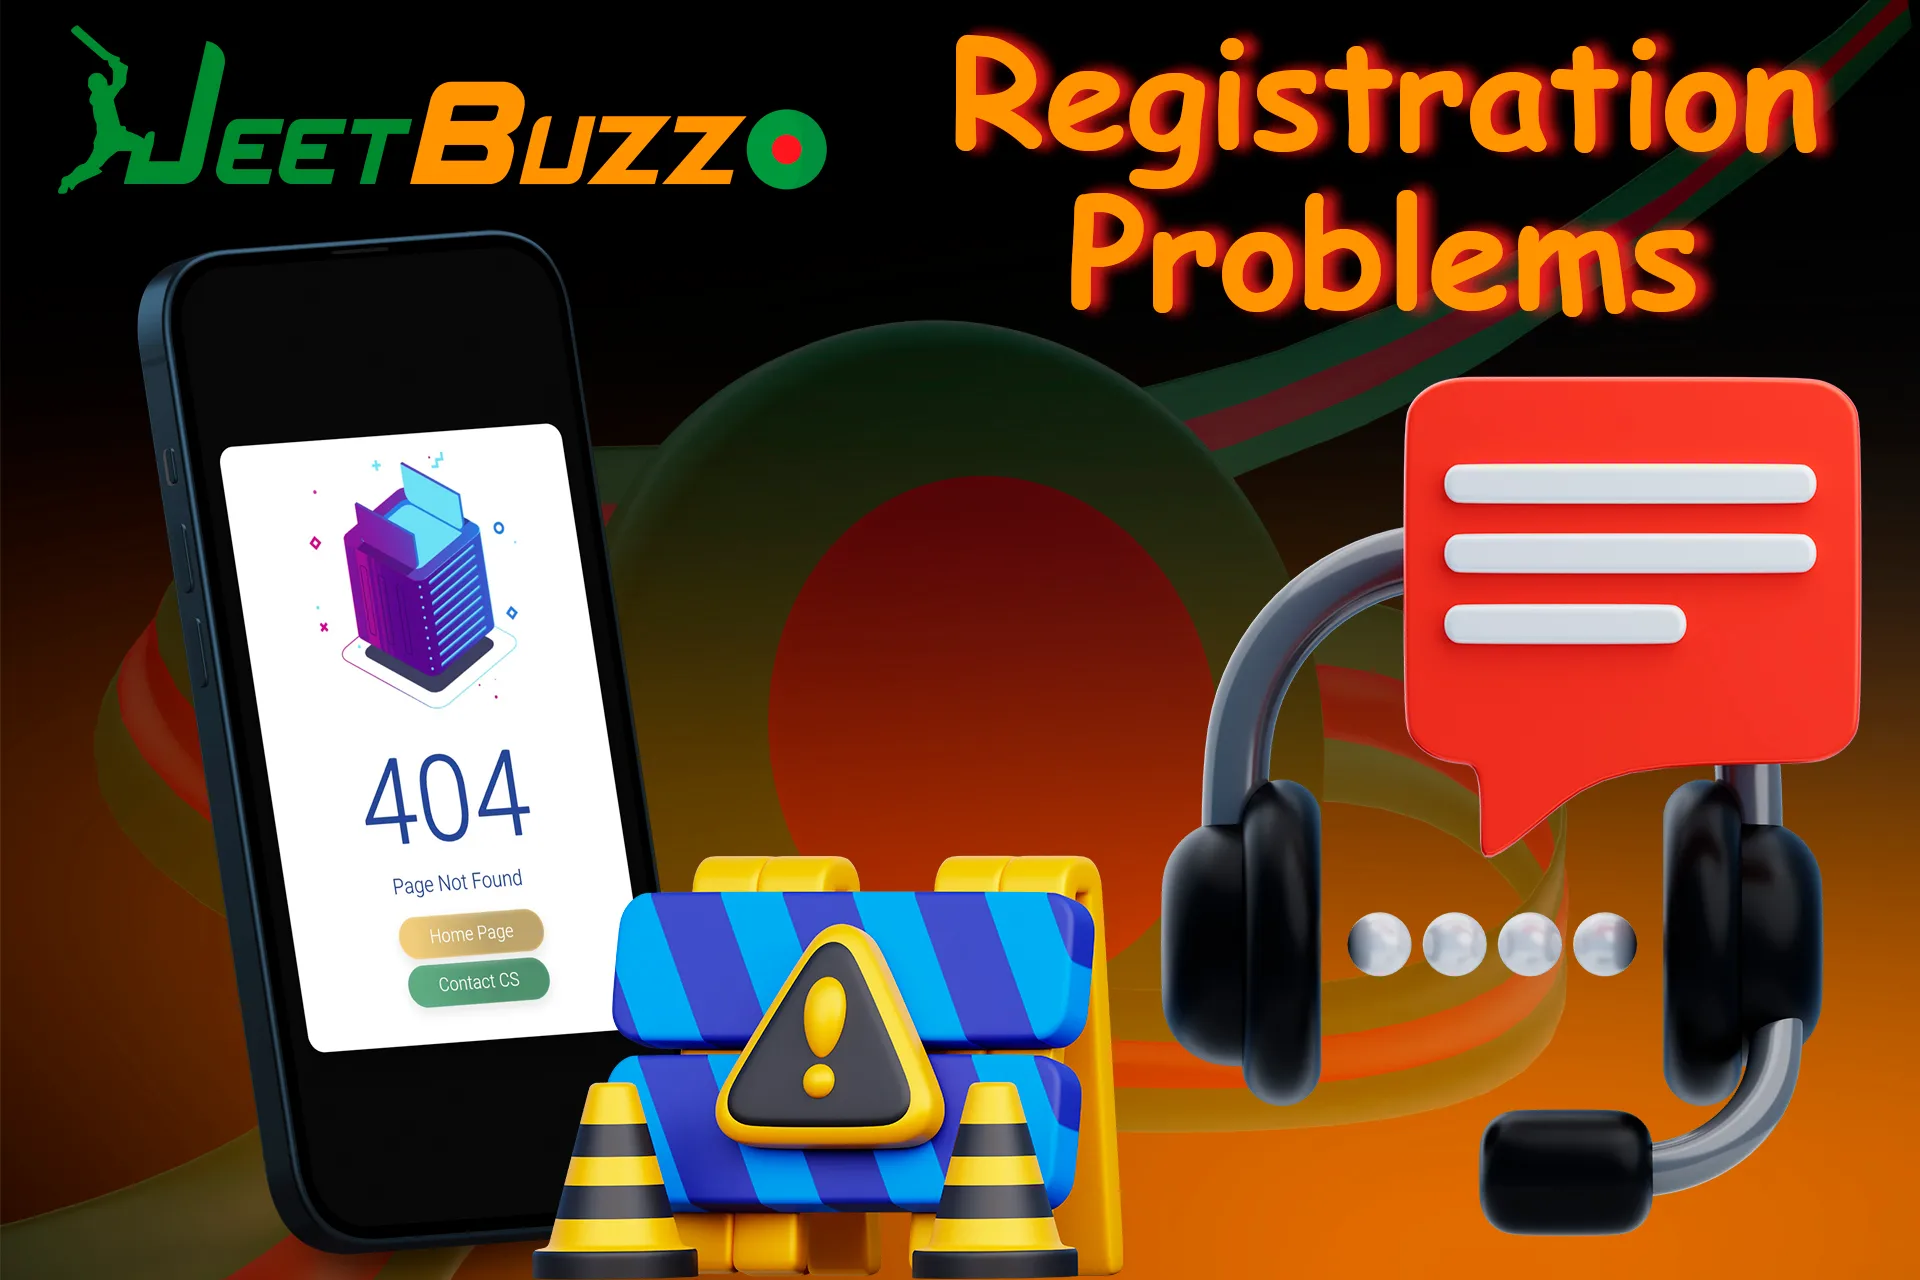 some cases in which problems with registration in JeetBuzz may occur